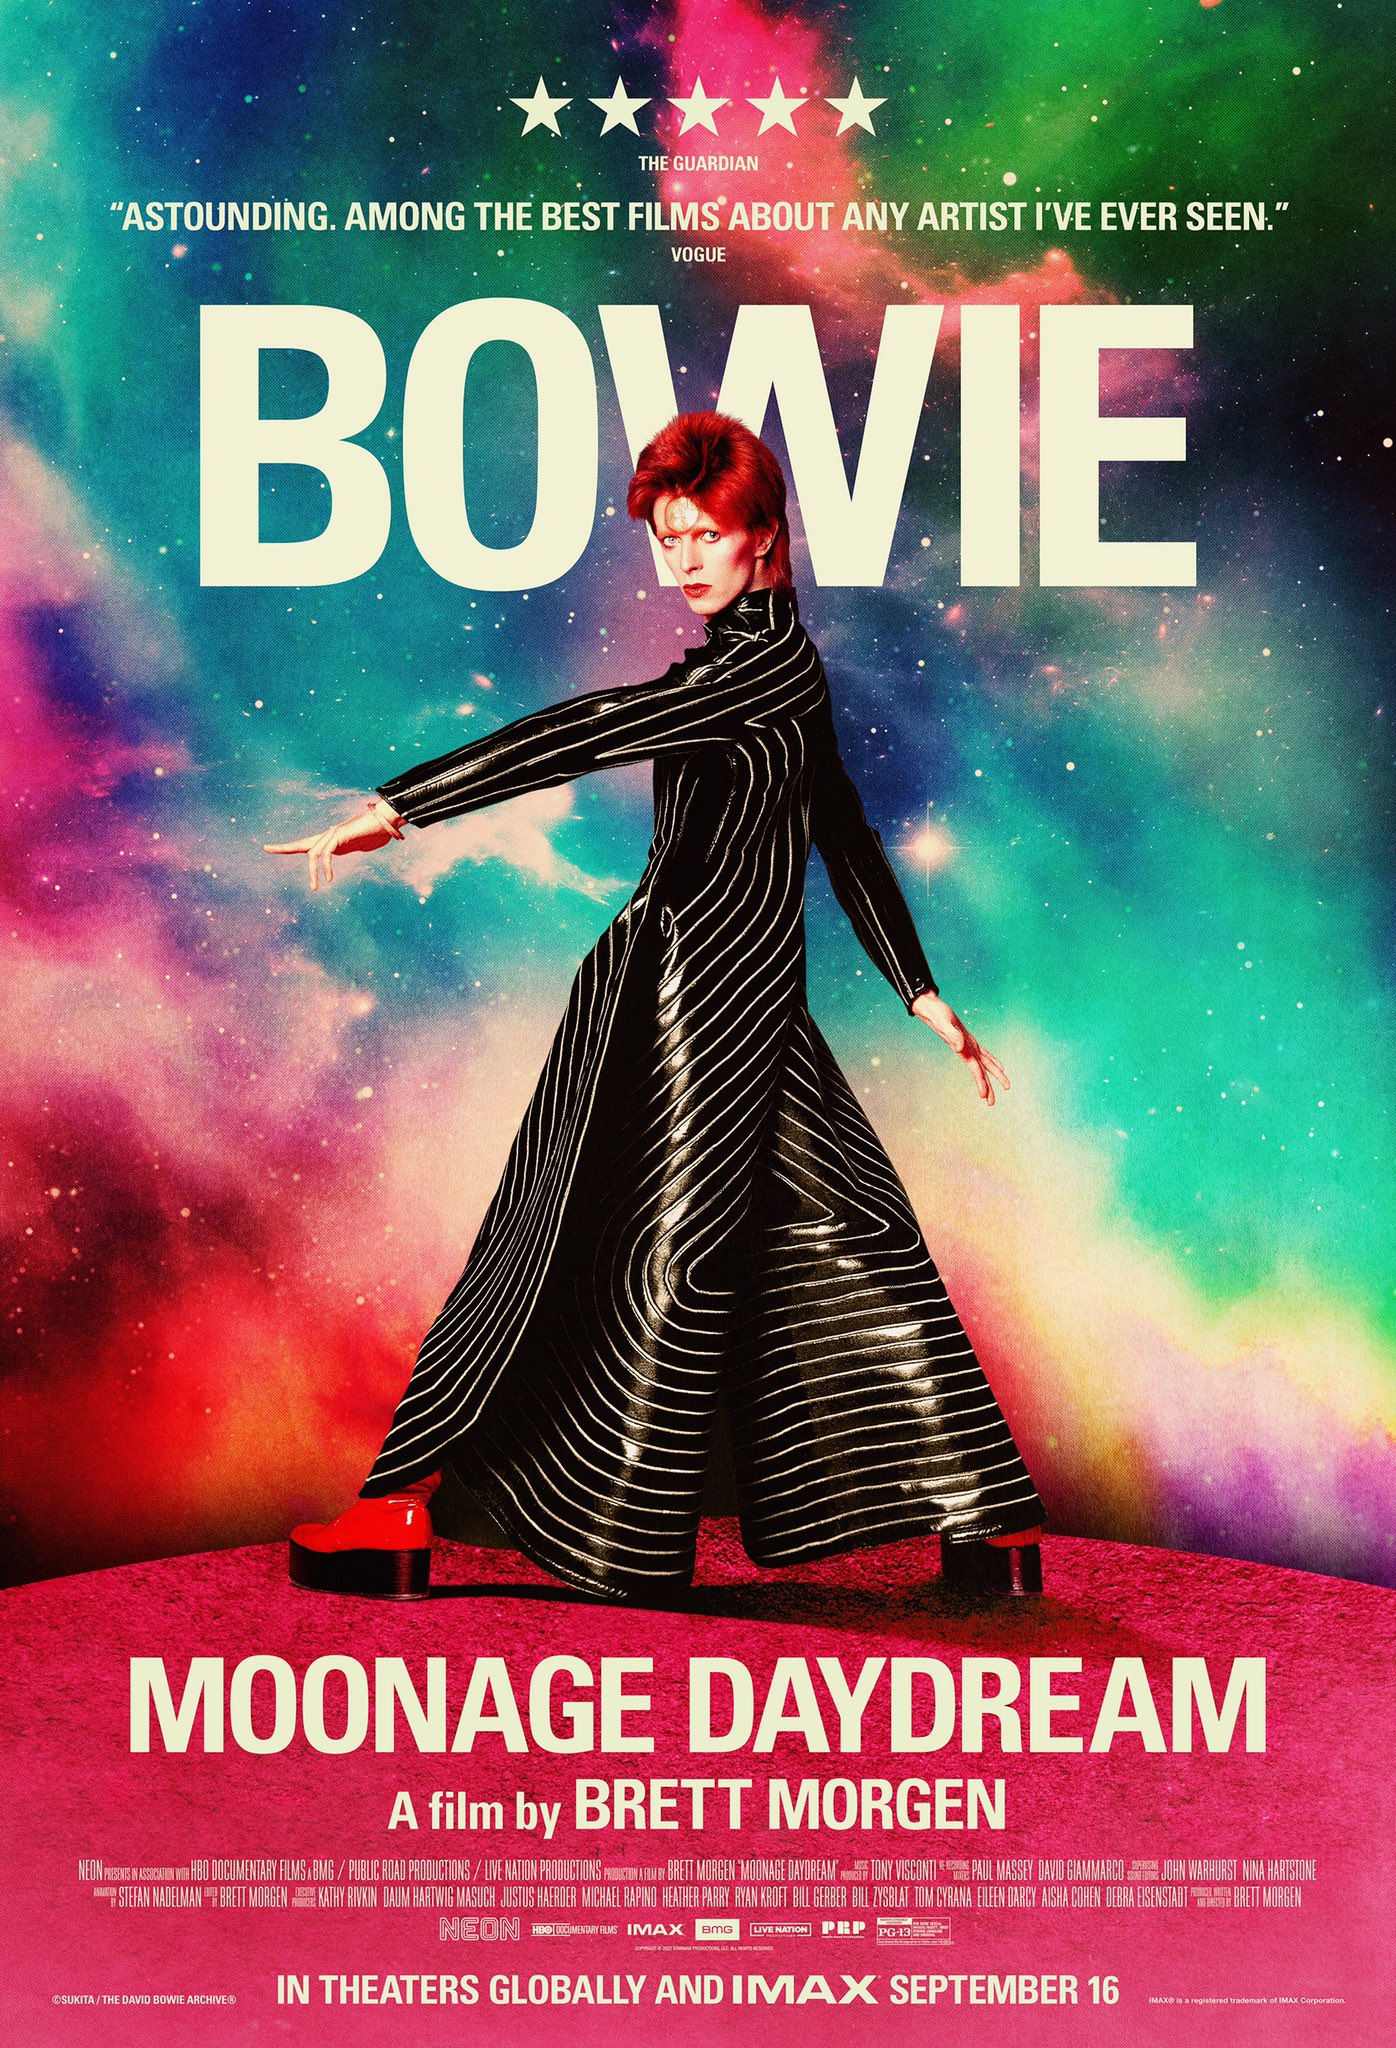 NEON on Twitter: "Official poster. MOONAGE DAYDREAM starring ...